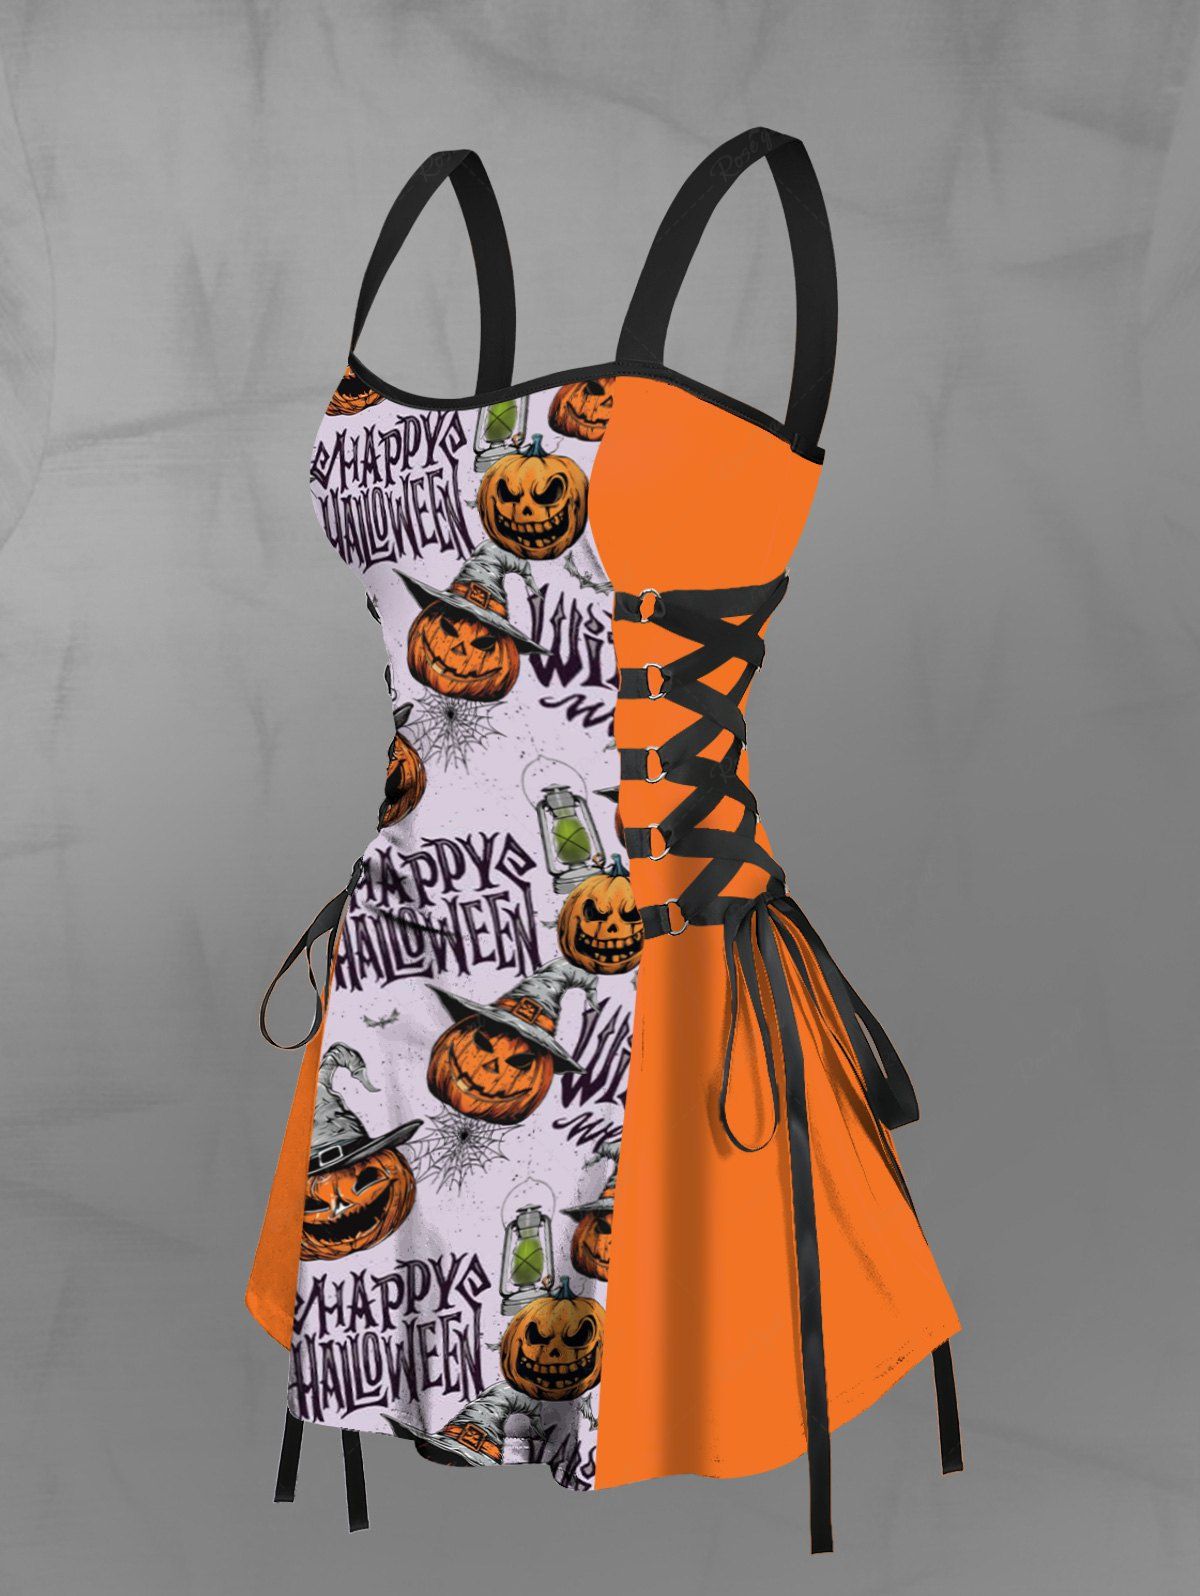 Gothic Skull Pumpkin Wizard Hat Letters Spider Web Print Halloween Lace Up A Line Tank Dress